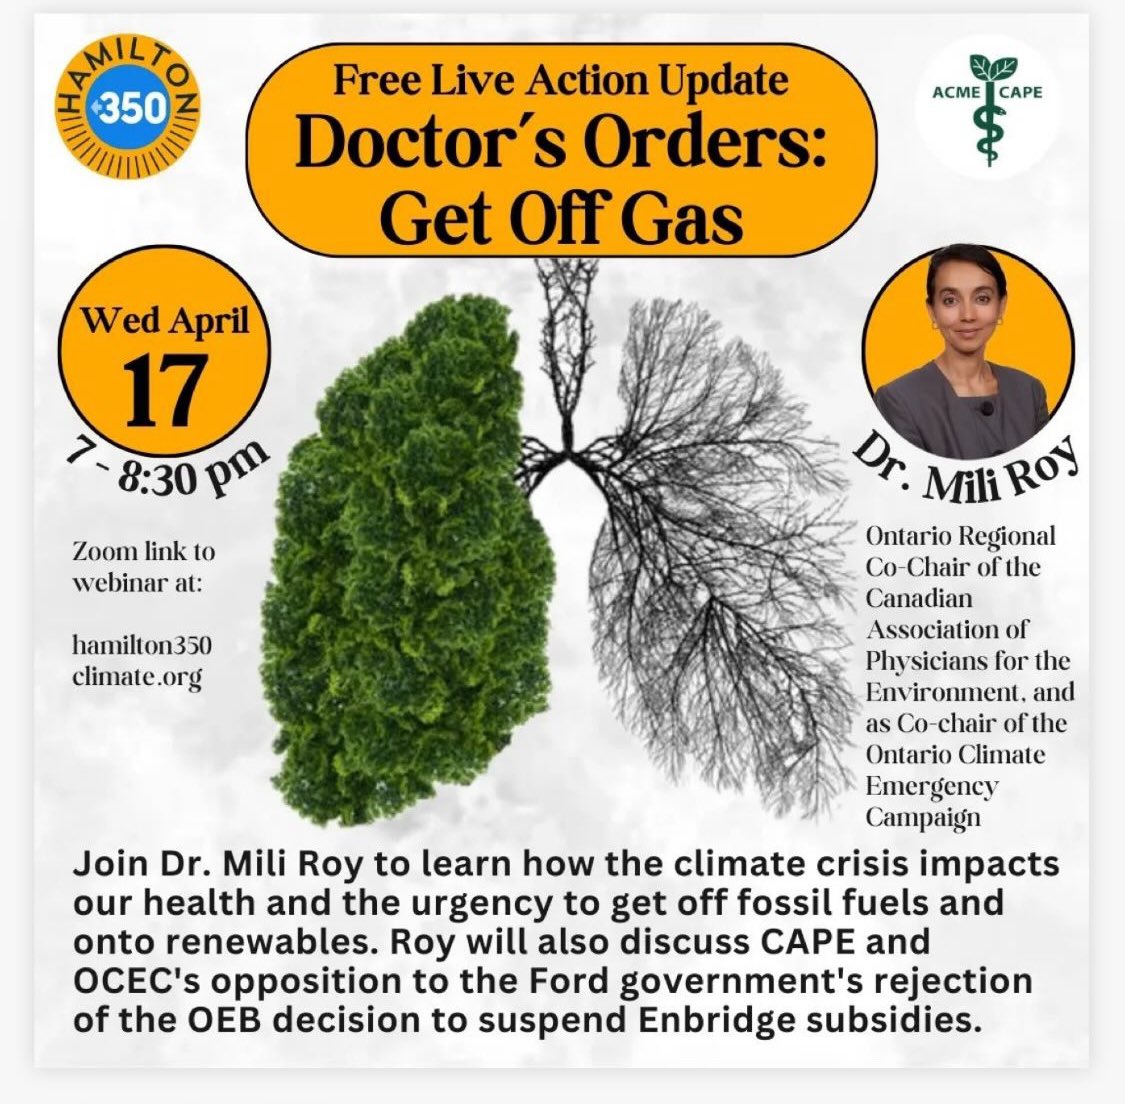 Join our webinar Wednesday @ 7PM!! We’ve got Dr. Mili Roy from @CAPE_ACME talking climate change, “natural” (aka methane) gas, greenwashing & what it all means for our health 🩺 How can we make our homes & cities healthier places to be? Zoom link: shorturl.at/bkyHY